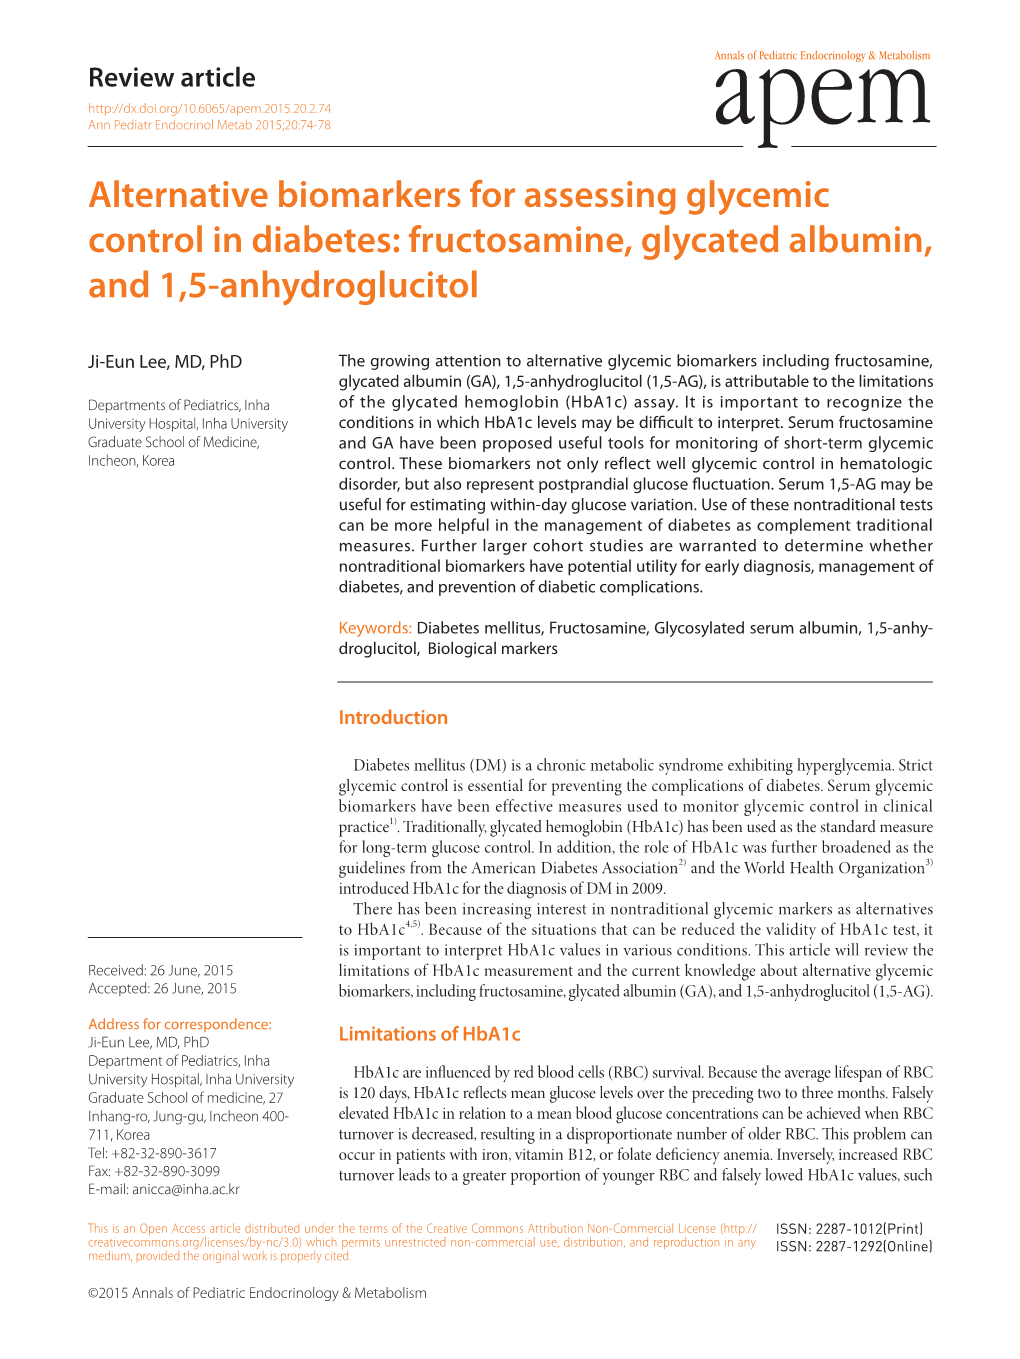 Alternative Biomarkers for Assessing Glycemic Control in Diabetes: Fructosamine, Glycated Albumin, and 1,5-Anhydroglucitol